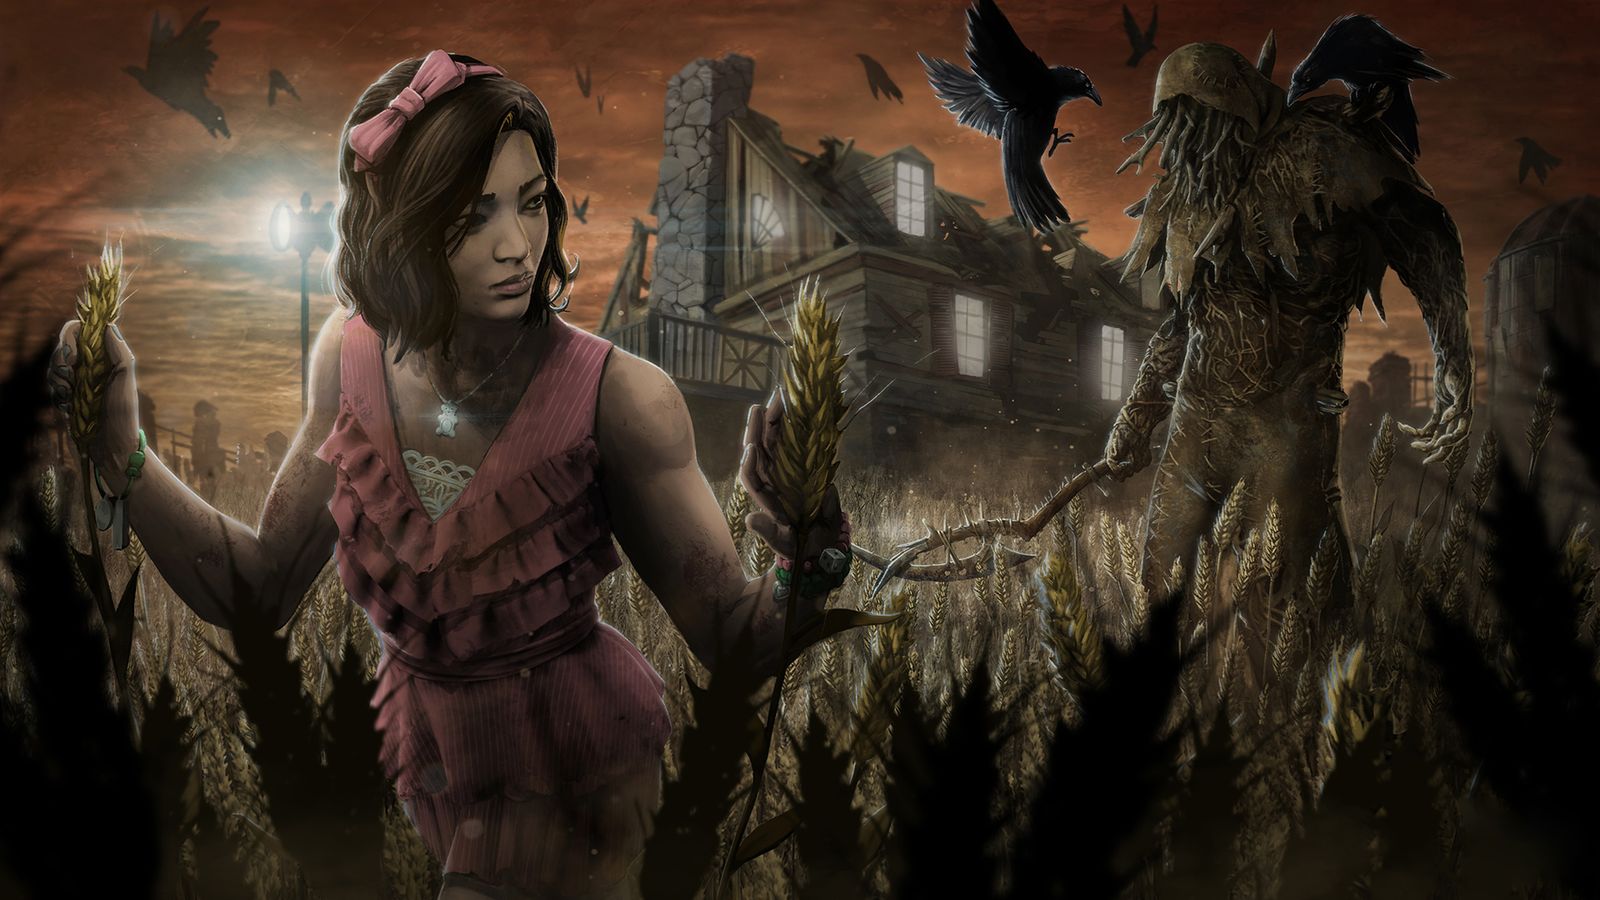 Concept art of a killer and a survivor in a wheat field in Dead by Daylight